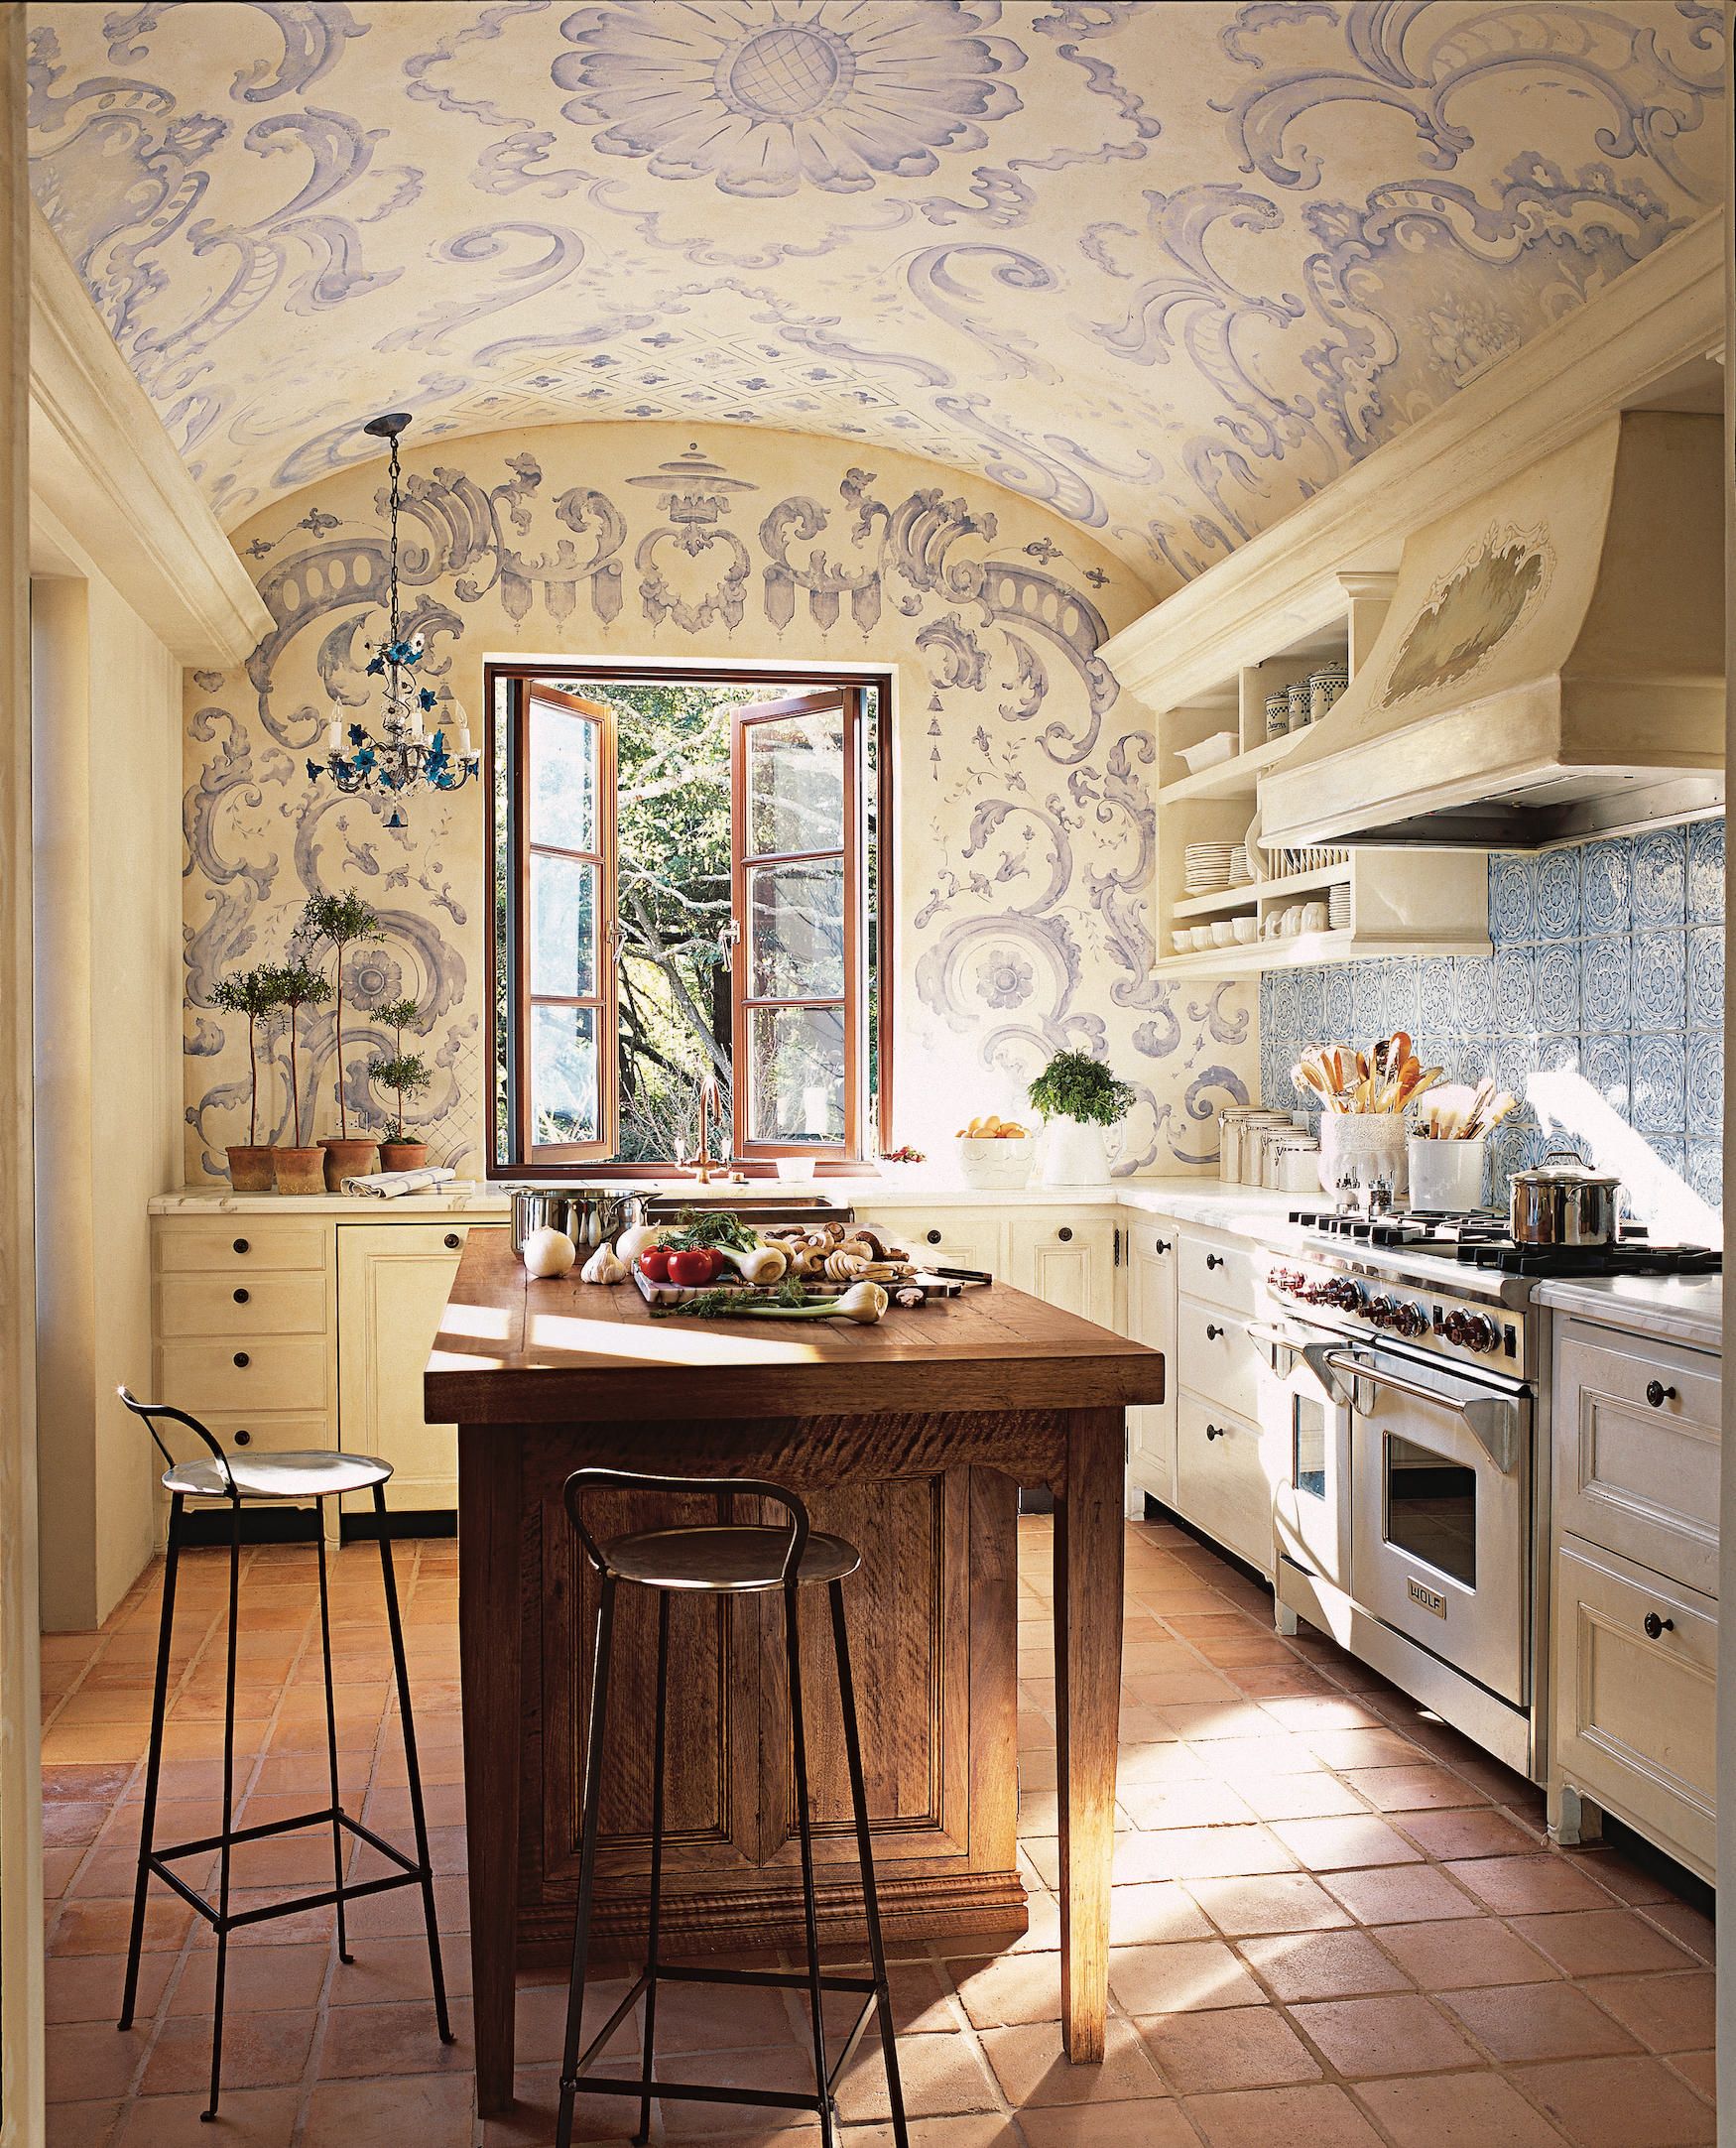 How to Design a Beautiful Small French Country Kitchen - MY CHIC OBSESSION